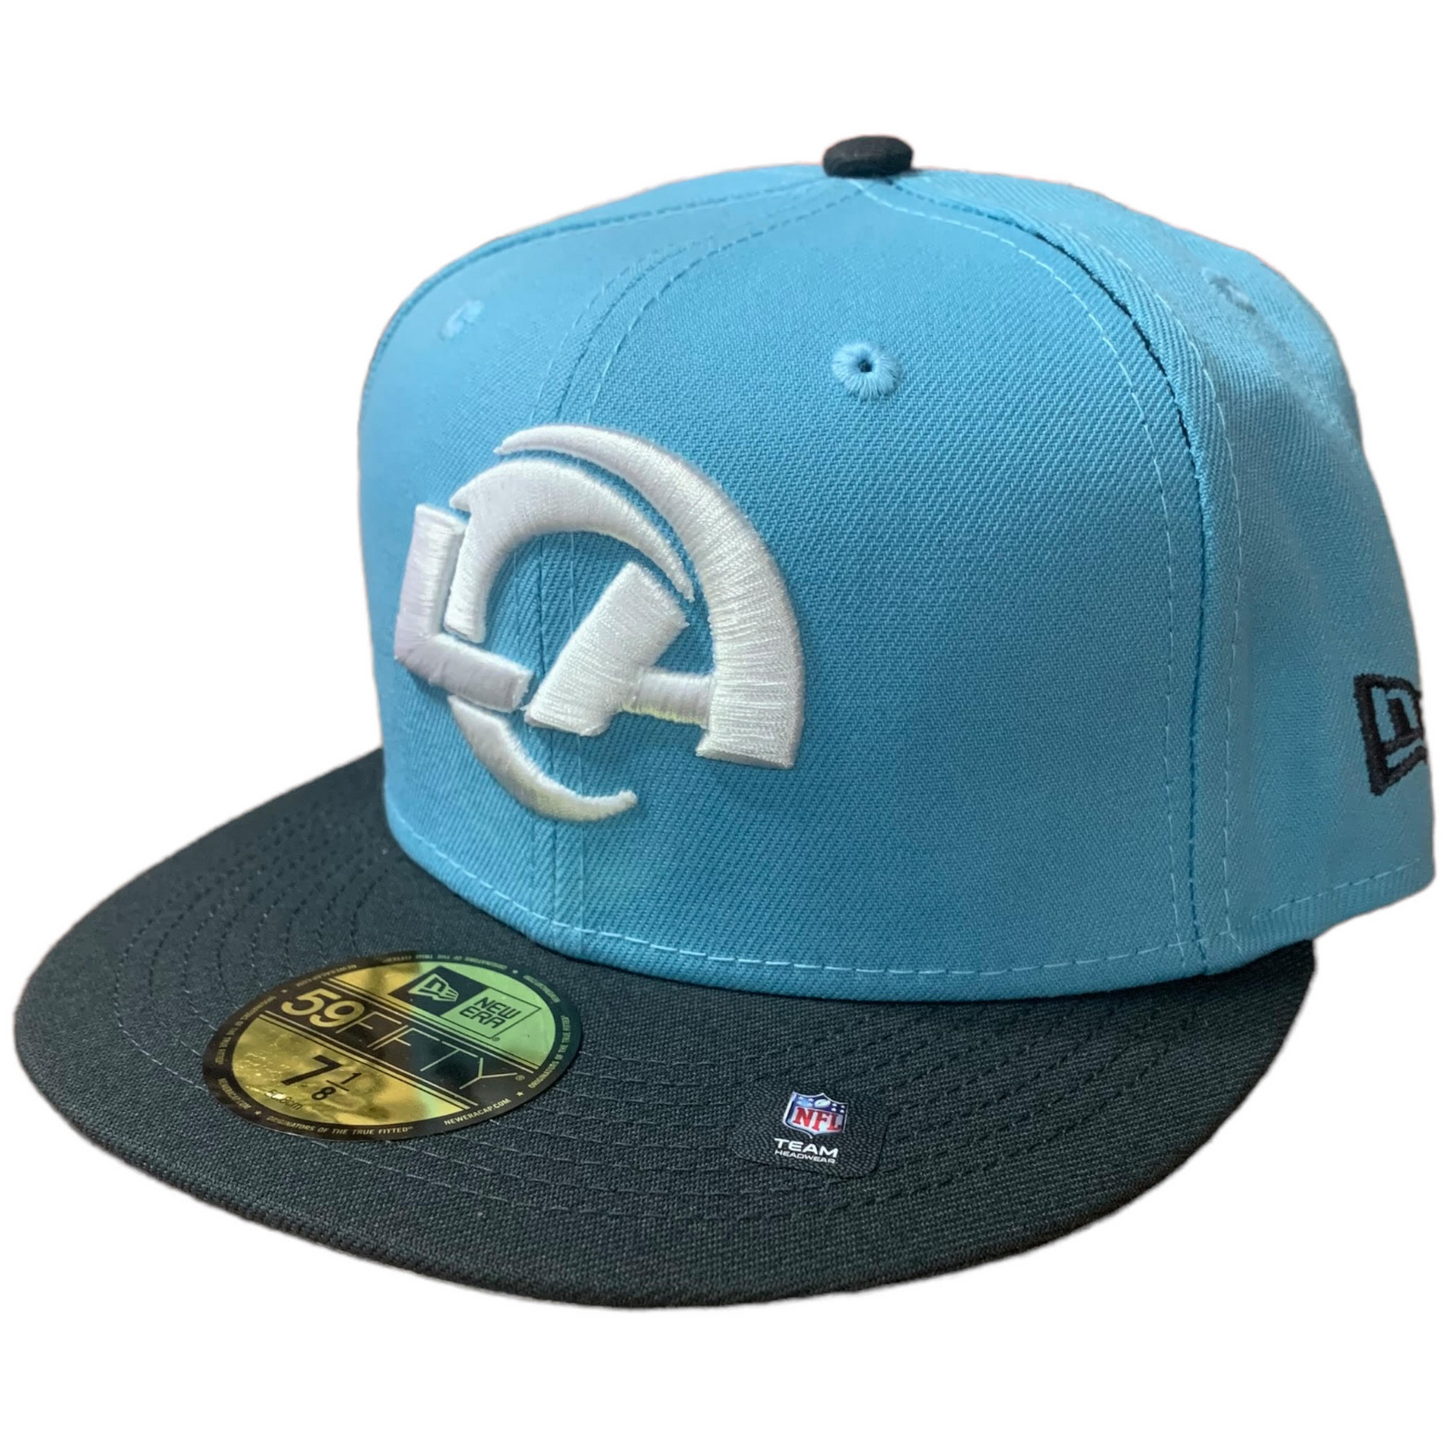 LOS ANGELES RAMS 2-TONE COLOR PACK 59FIFTY FITTED HAT - LIGHT BLUE/ CHARCOAL